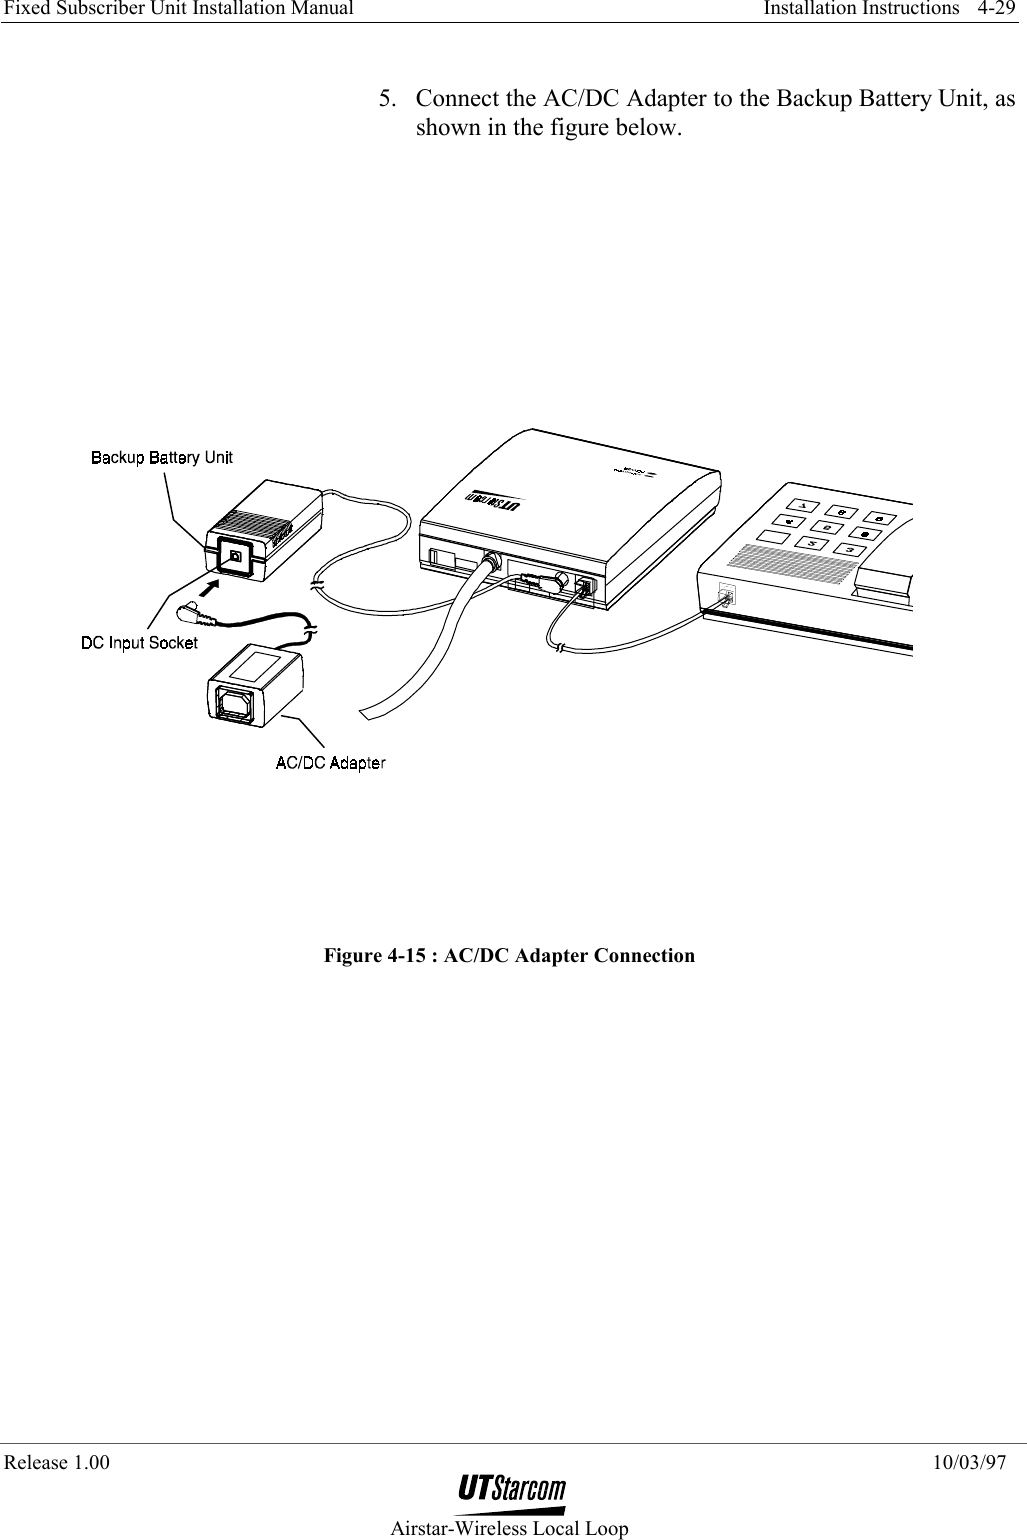 Fixed Subscriber Unit Installation Manual     Installation Instructions  Release 1.00    10/03/97  Airstar-Wireless Local Loop 4-29 5.  Connect the AC/DC Adapter to the Backup Battery Unit, as shown in the figure below.  Figure 4-15 : AC/DC Adapter Connection 